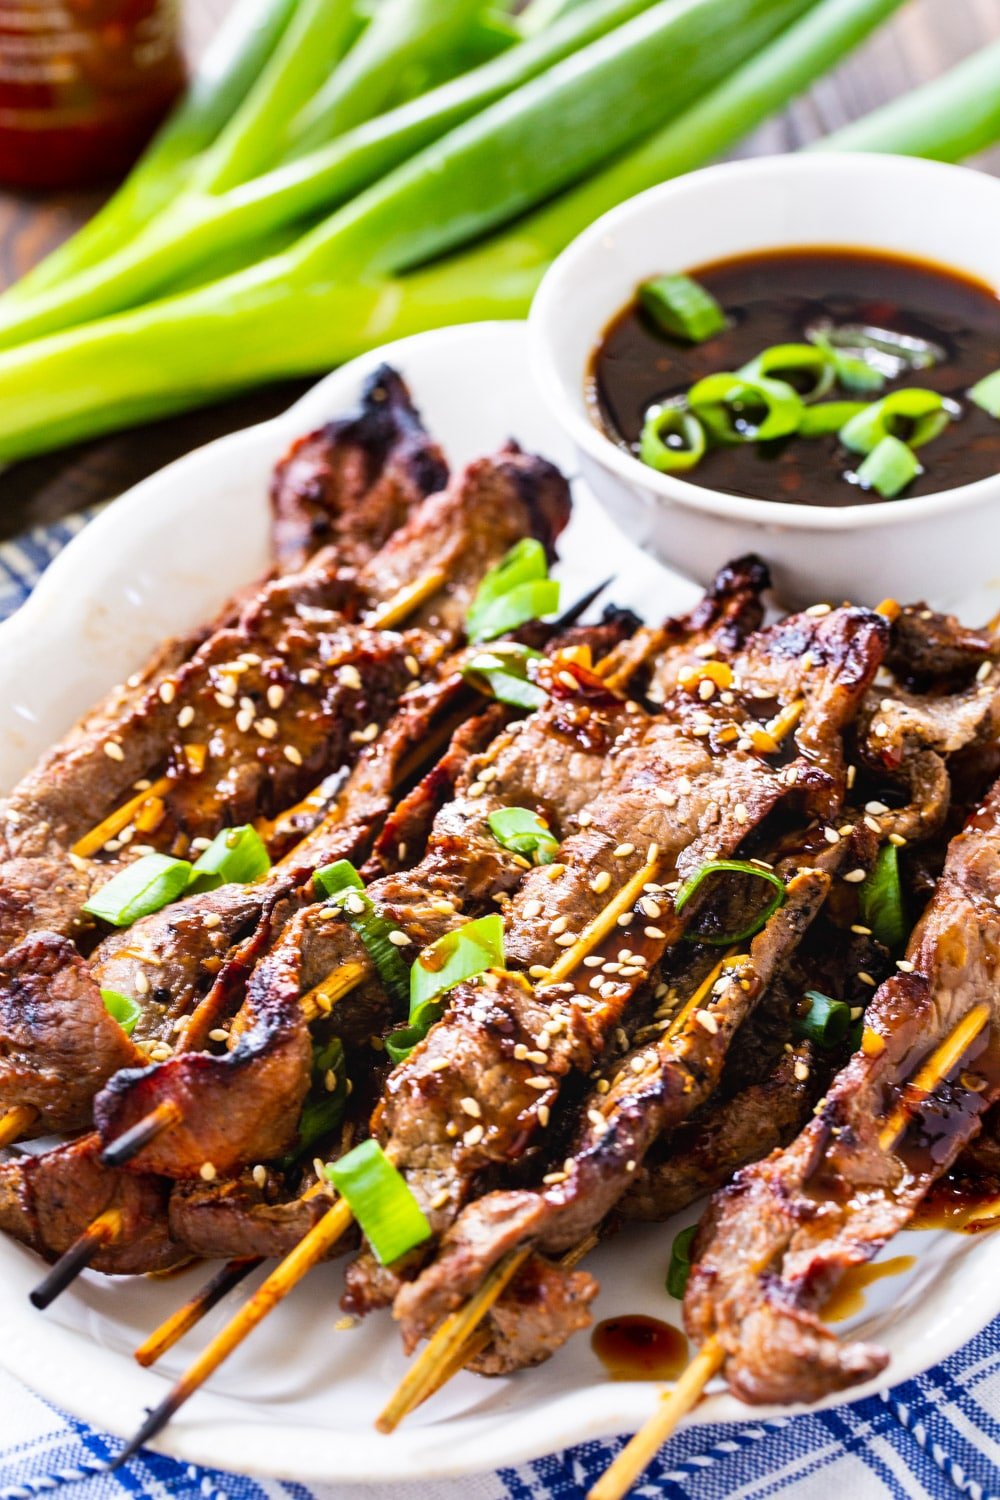 Steak Skewers with bowl of dipping sauce.